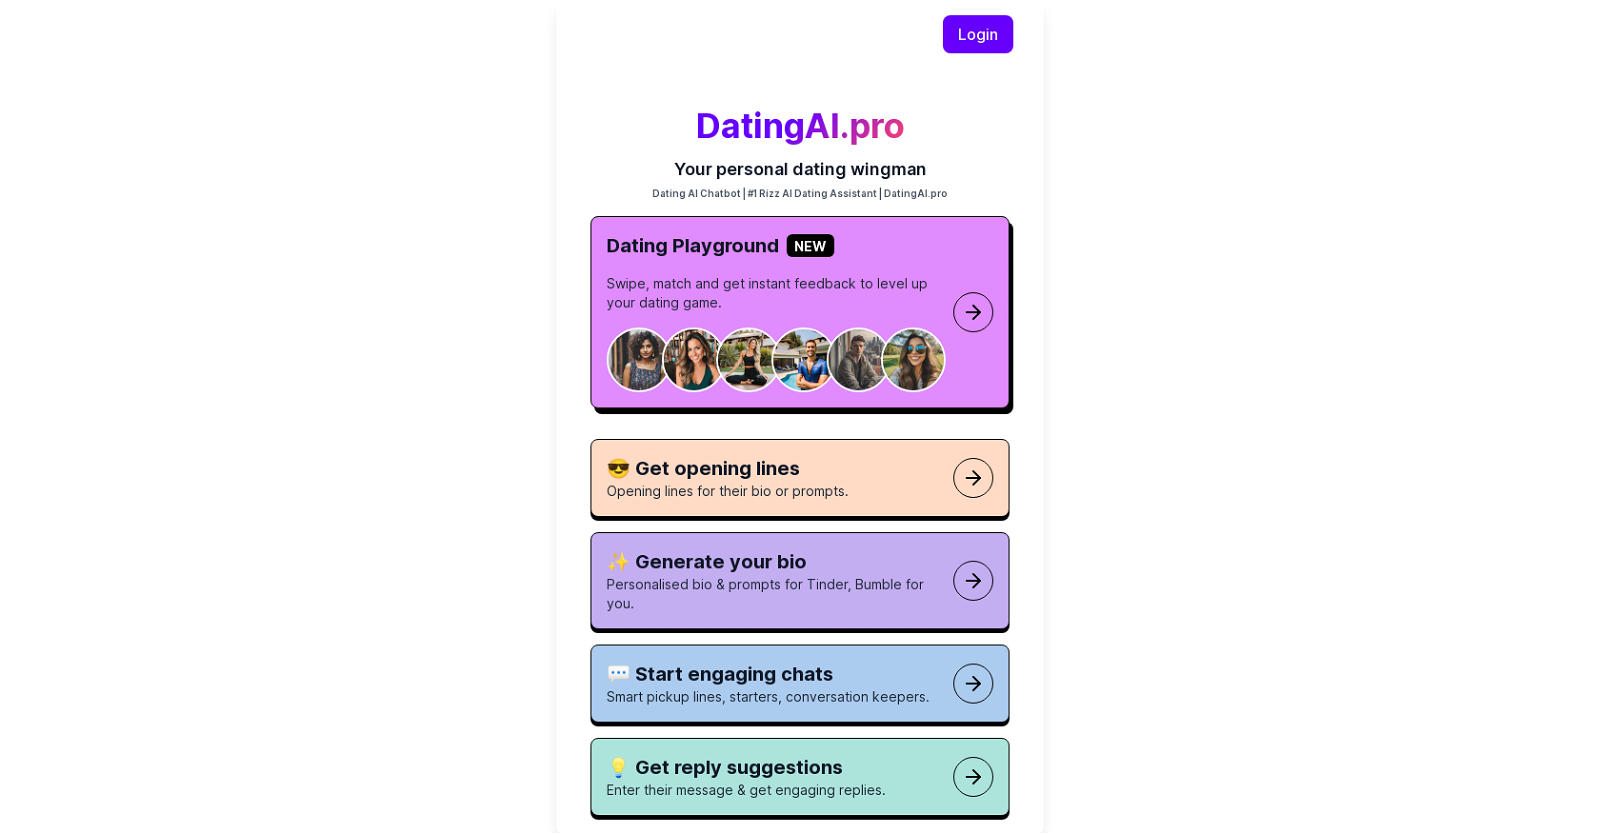 Dating AI Pro website